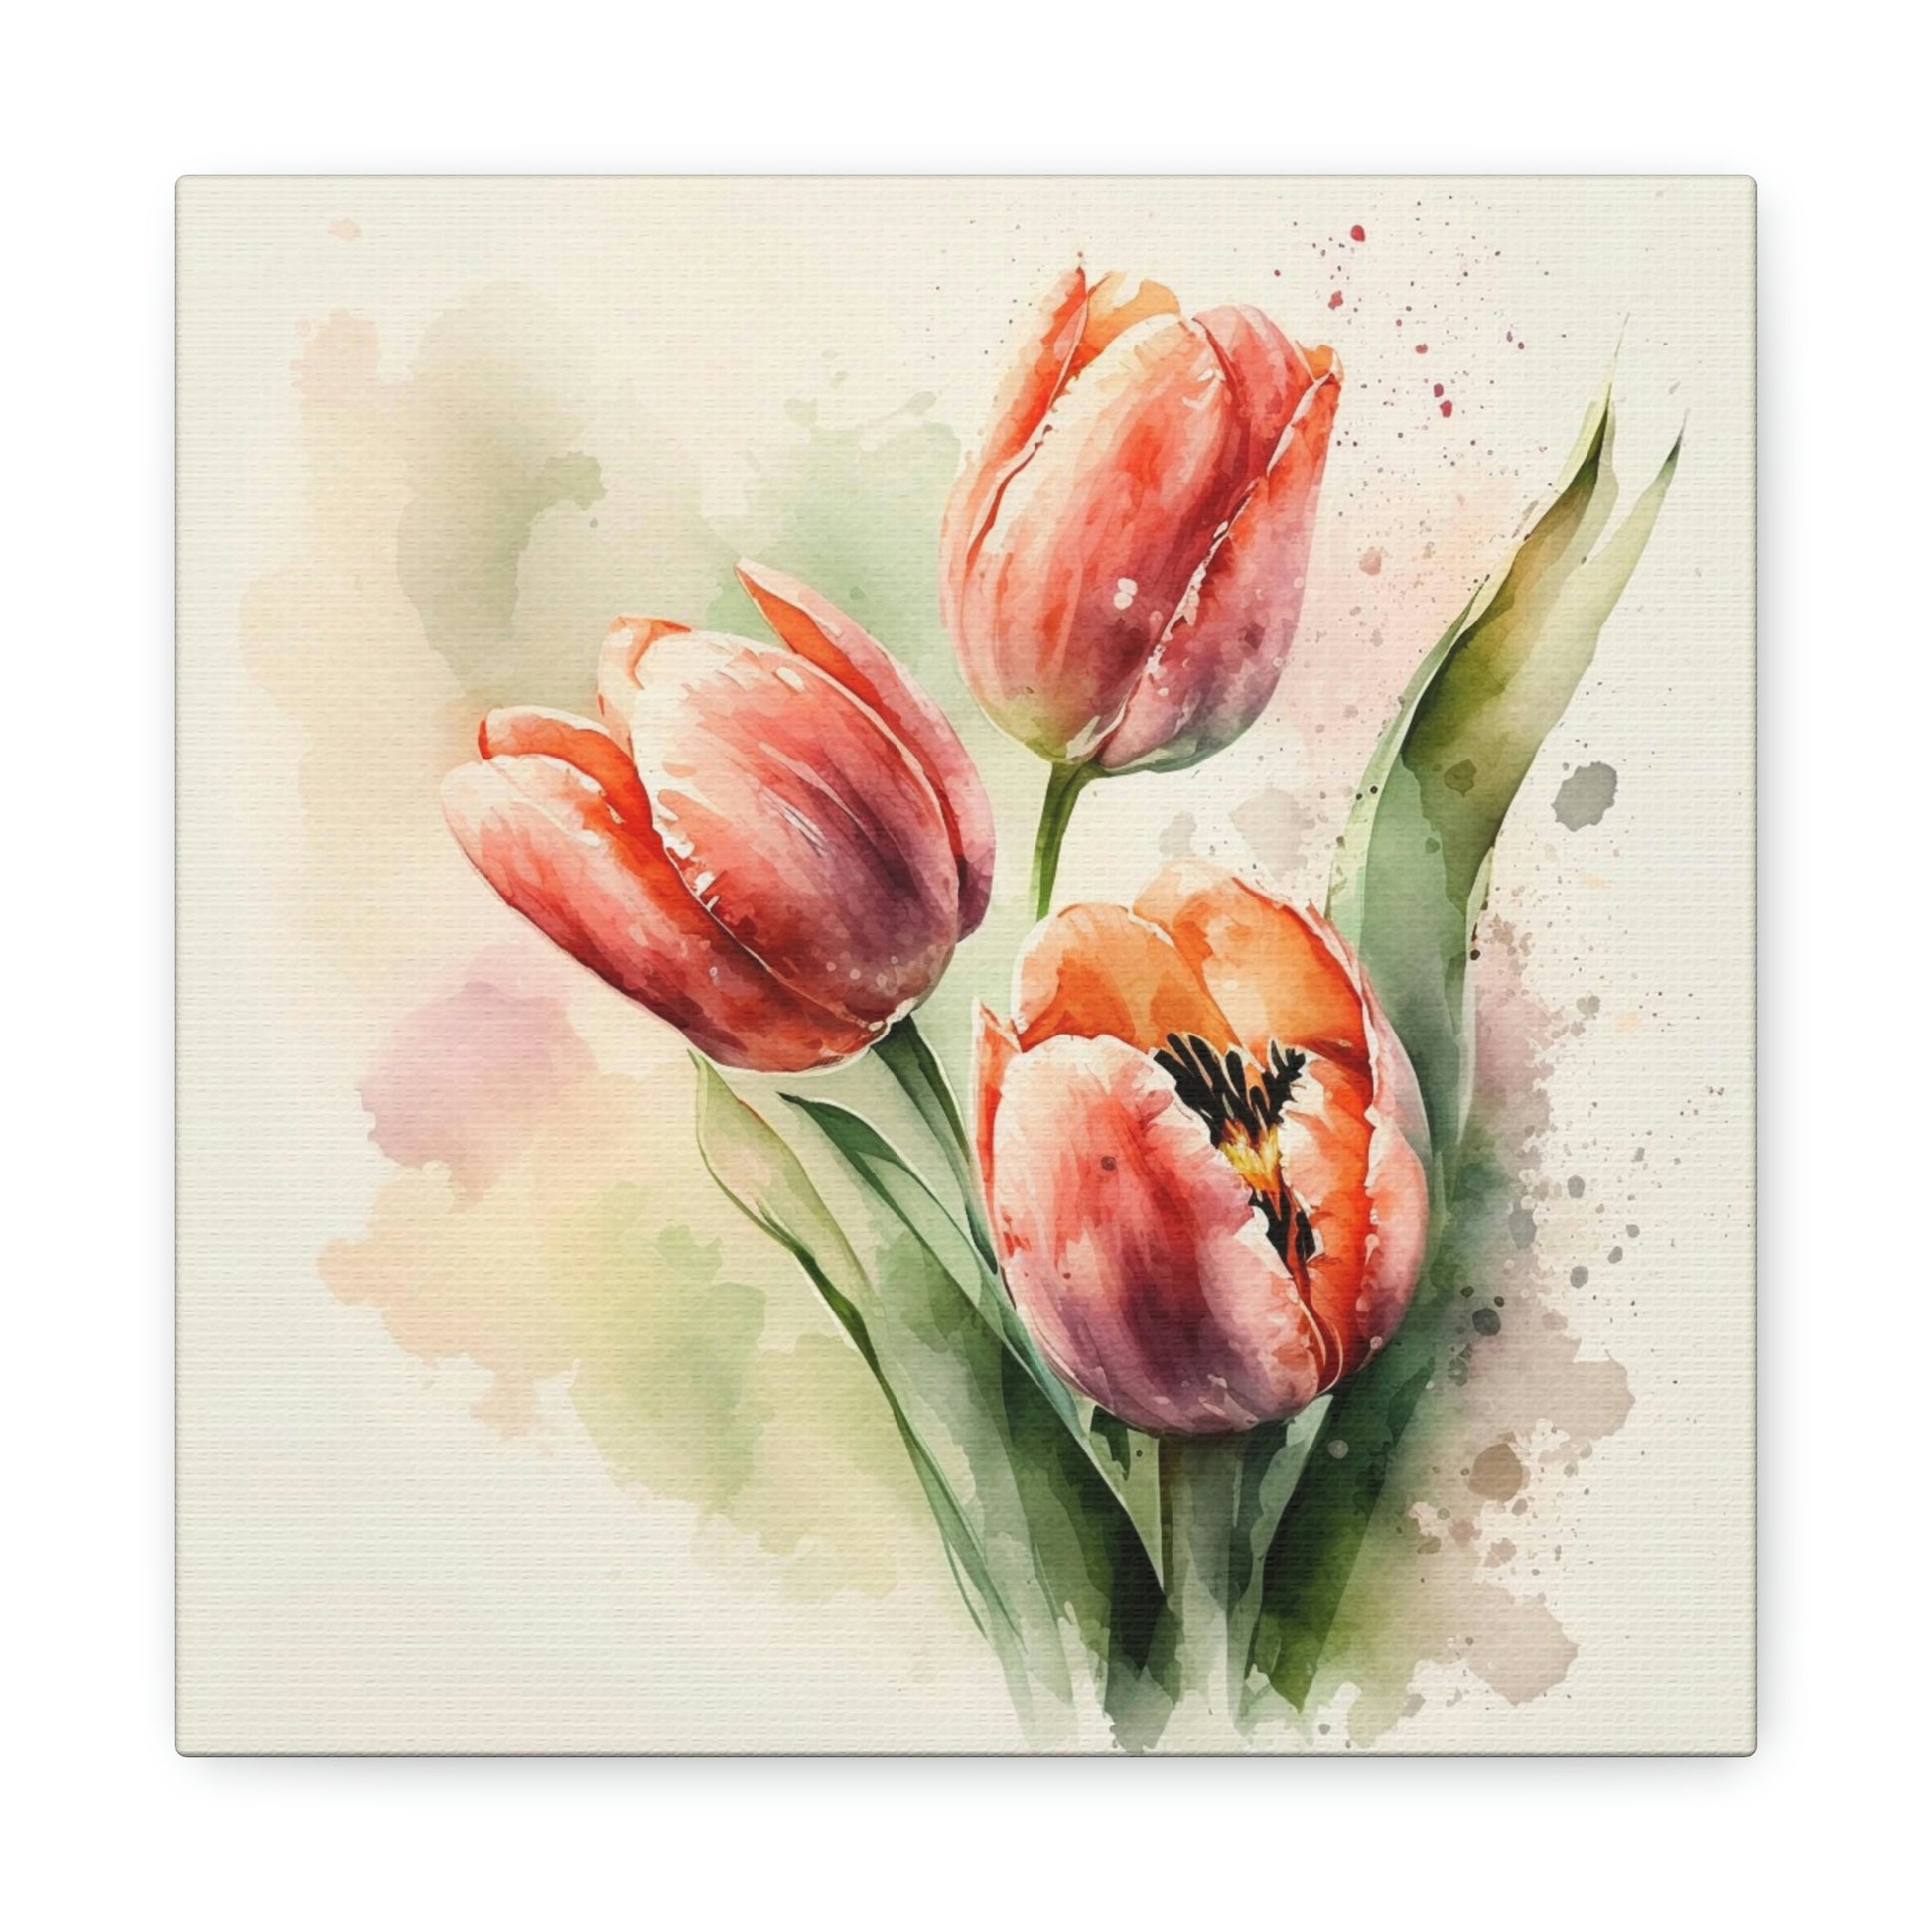 decorate with this beautiful watercolor tulip canvas art print, watercolor floral canvas decor, tulip canvas wall art for any room